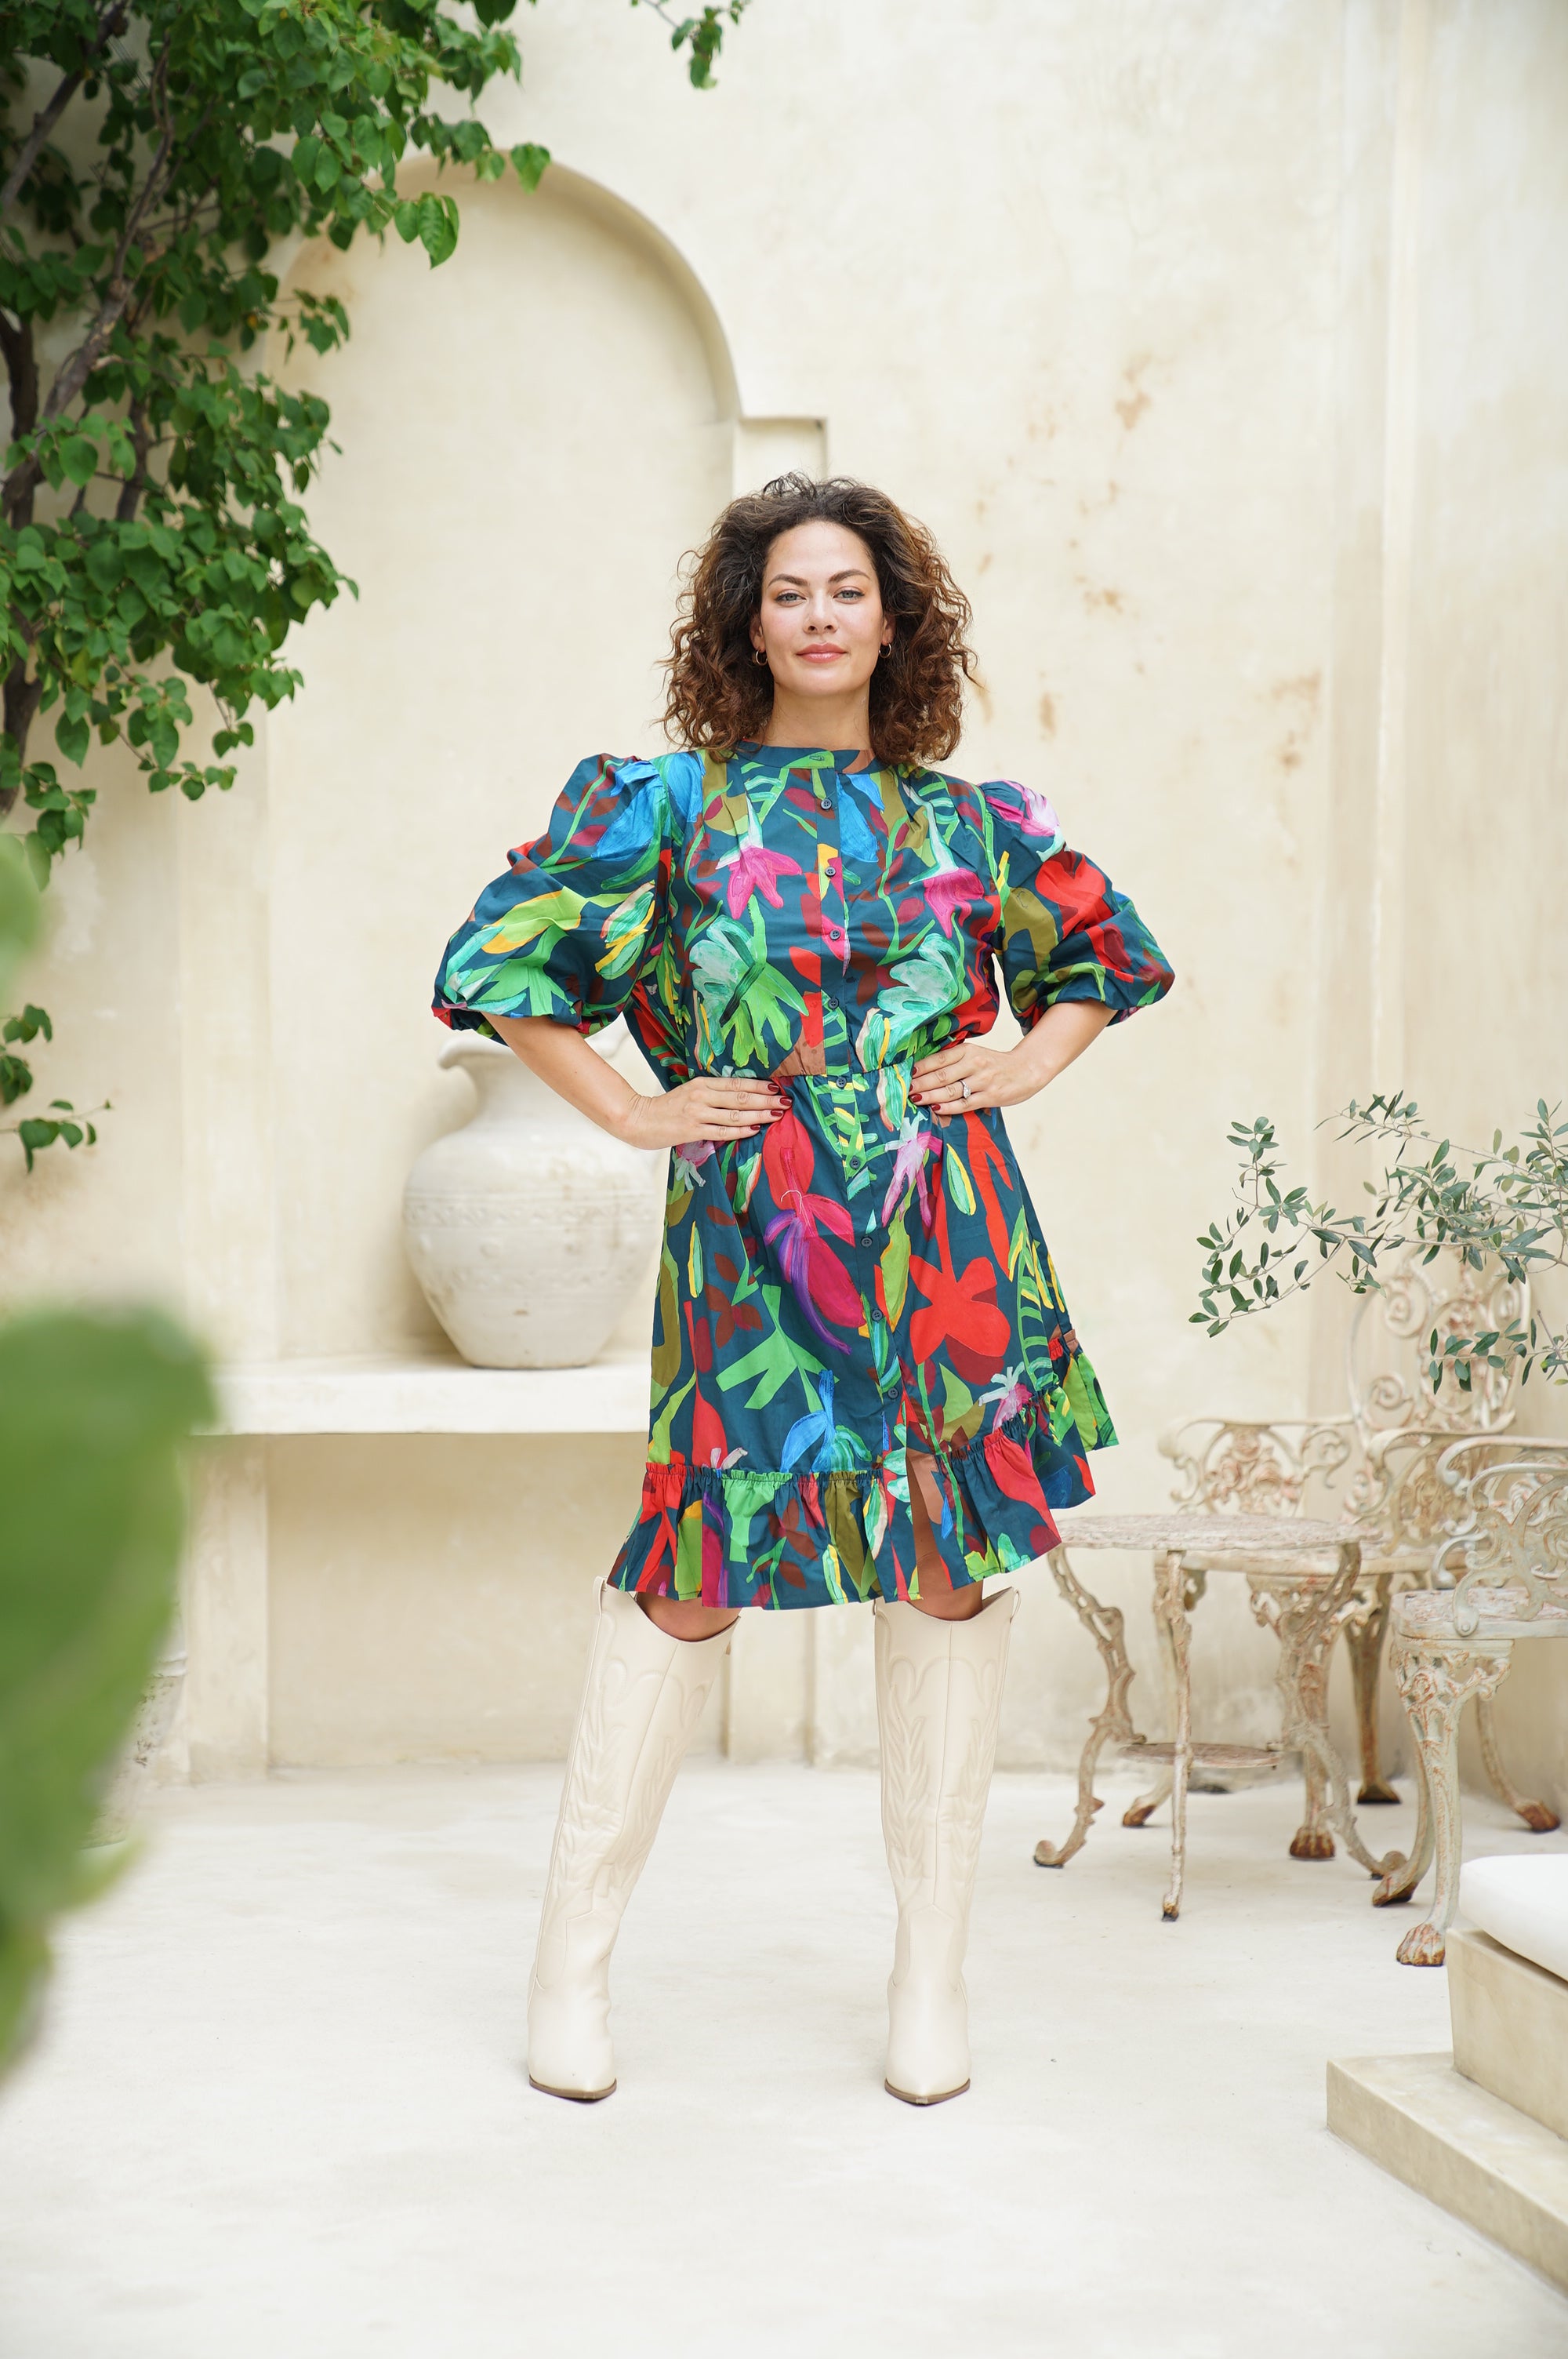 Upgrade your style with the Tropical Bloom Midi Dress. Perfect for any occasion, with vibrant prints and a flattering fit. Order now and dazzle!